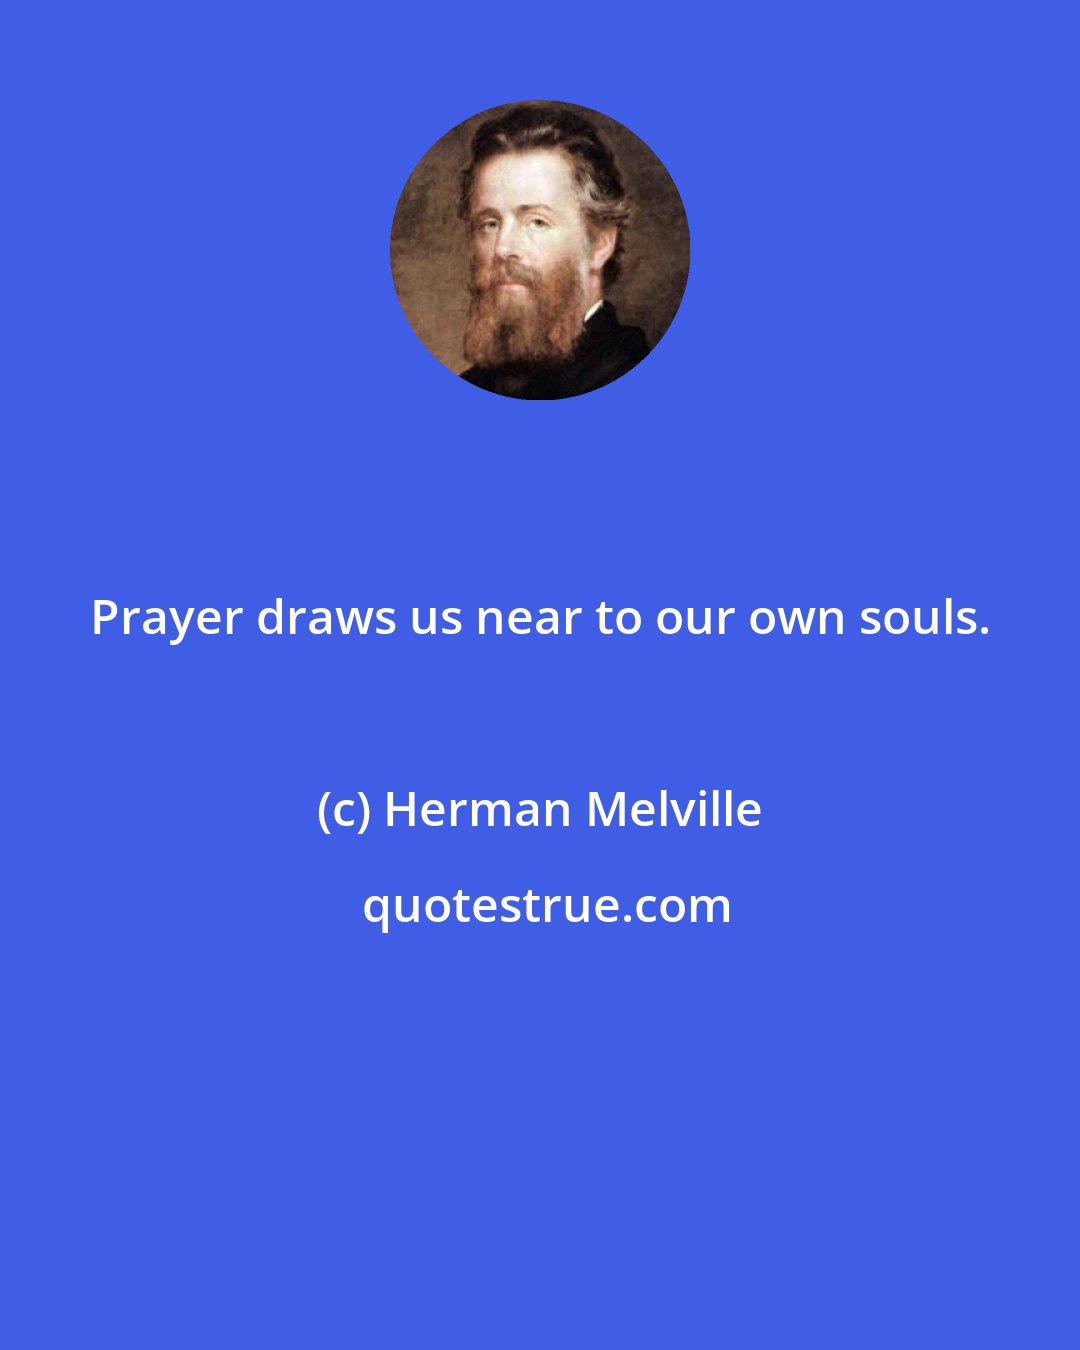 Herman Melville: Prayer draws us near to our own souls.